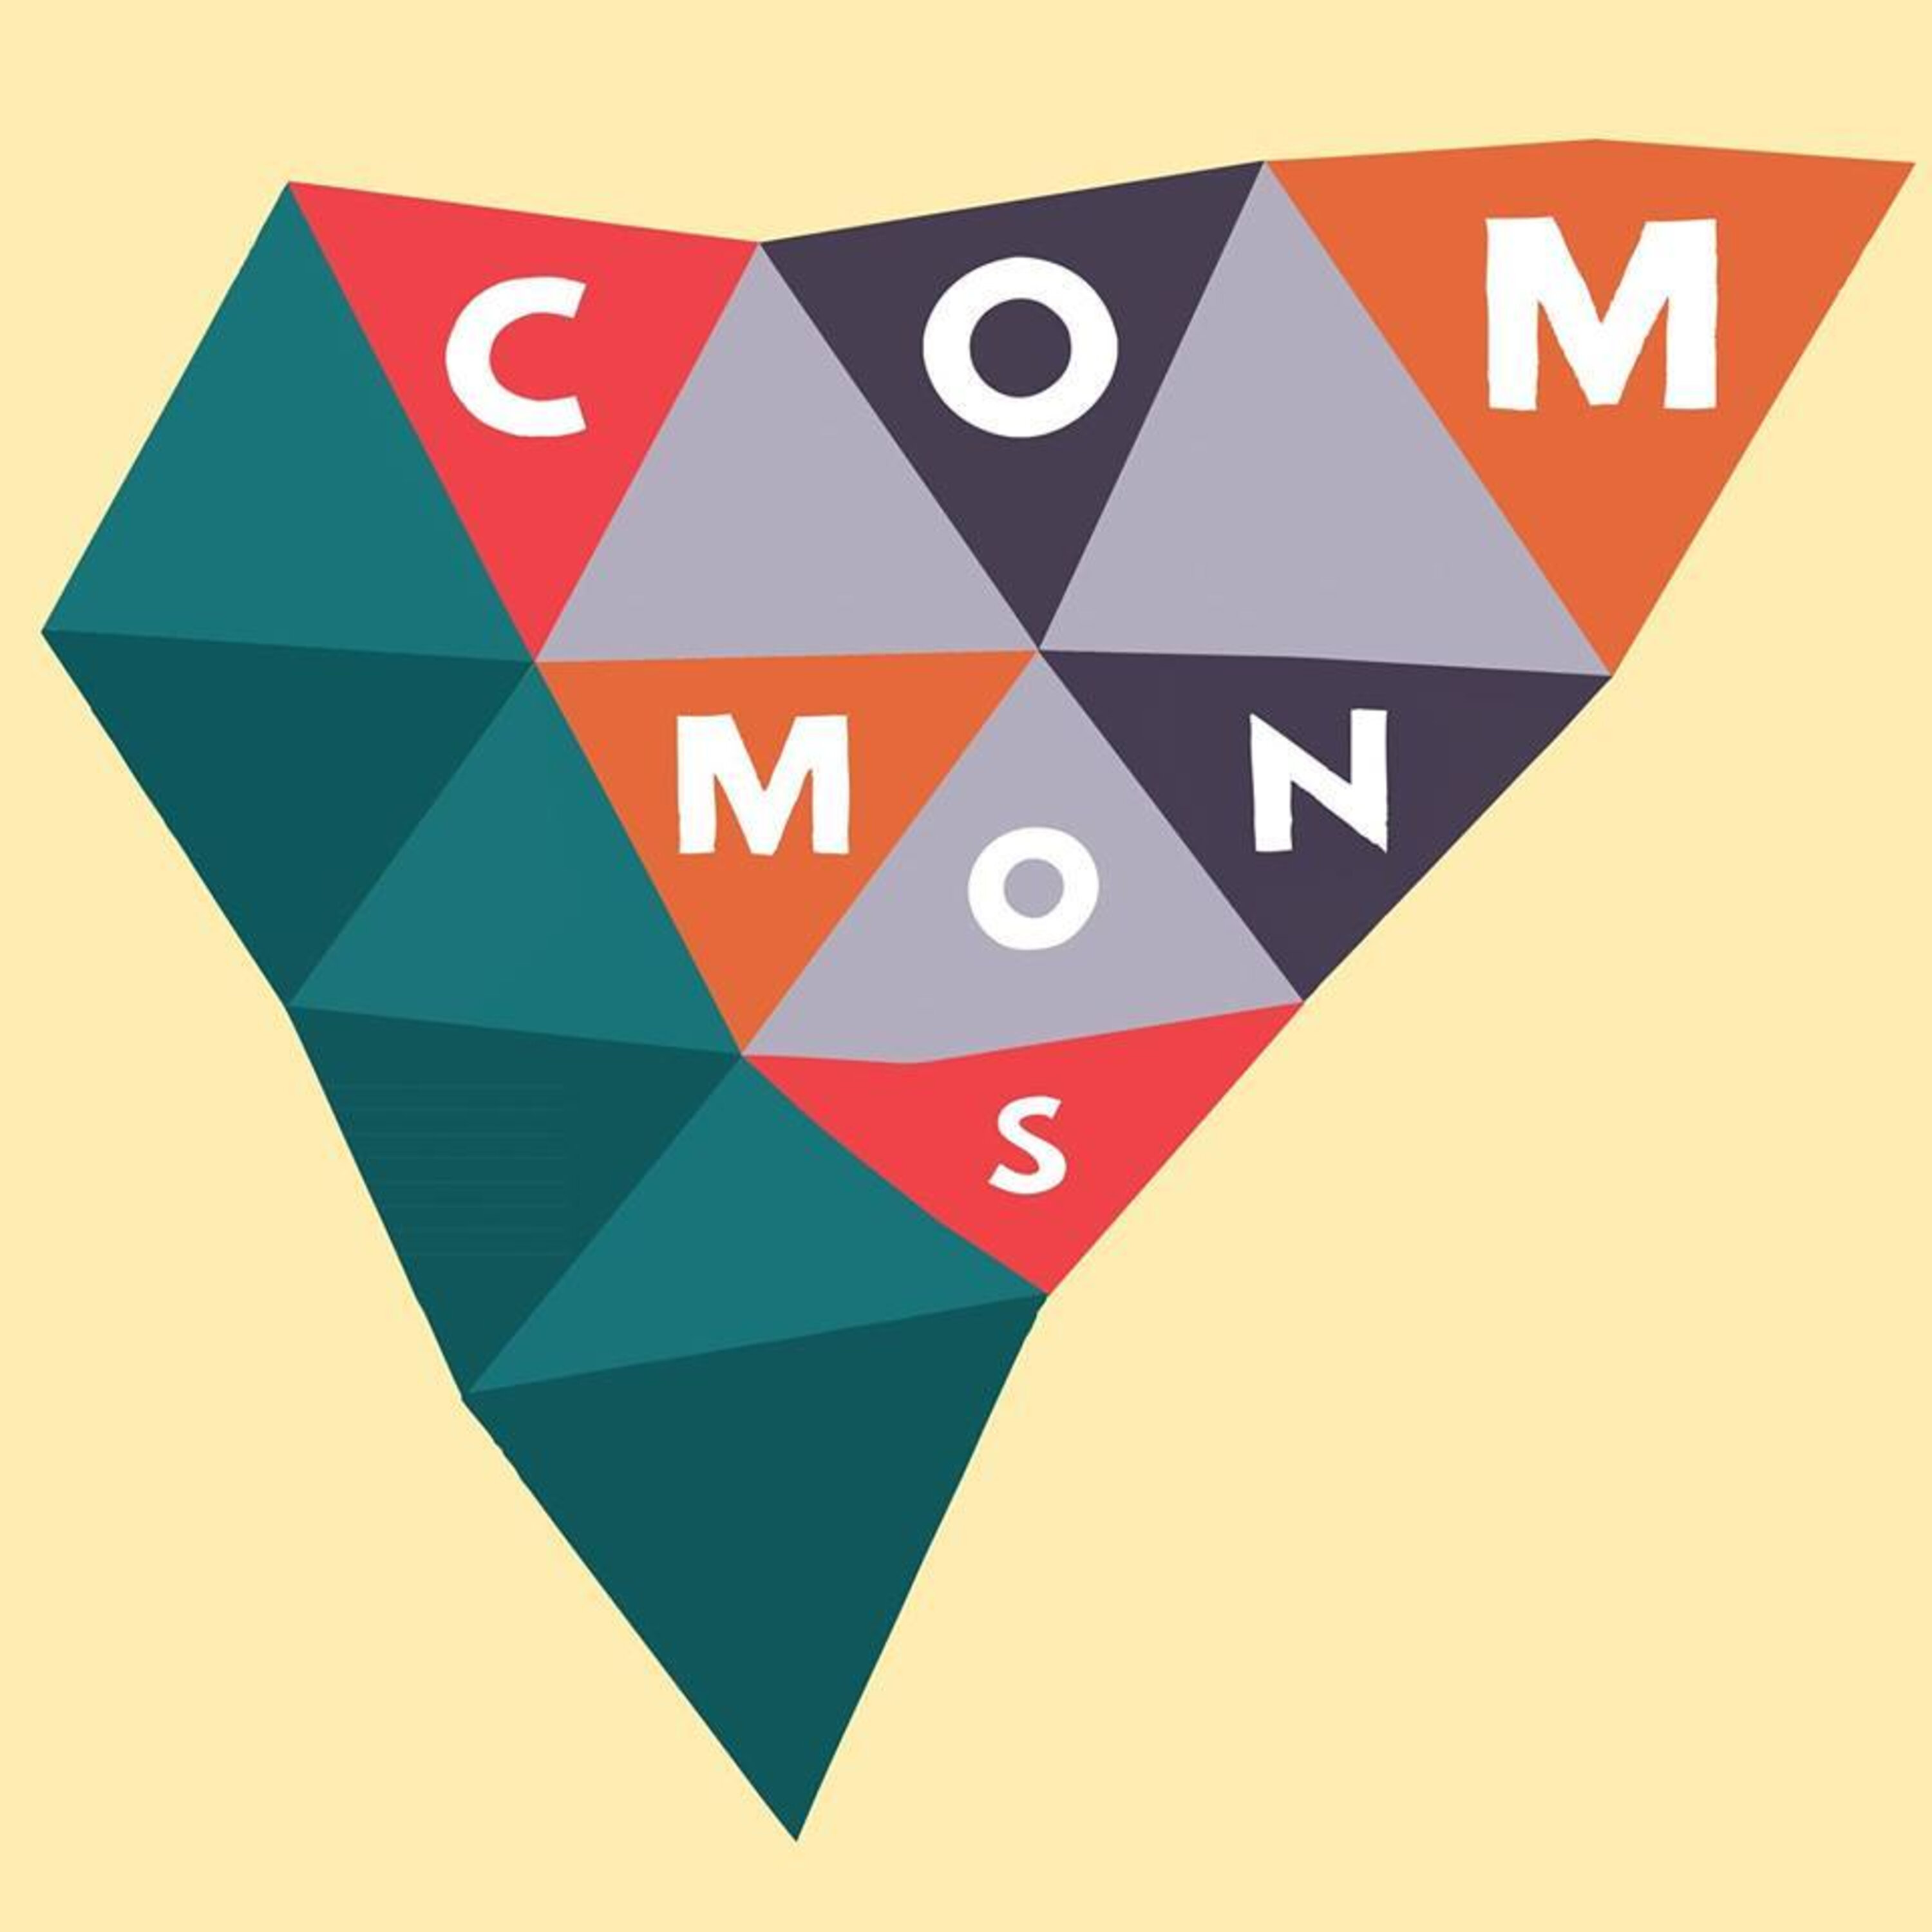 A Message About the Future of COMMONS